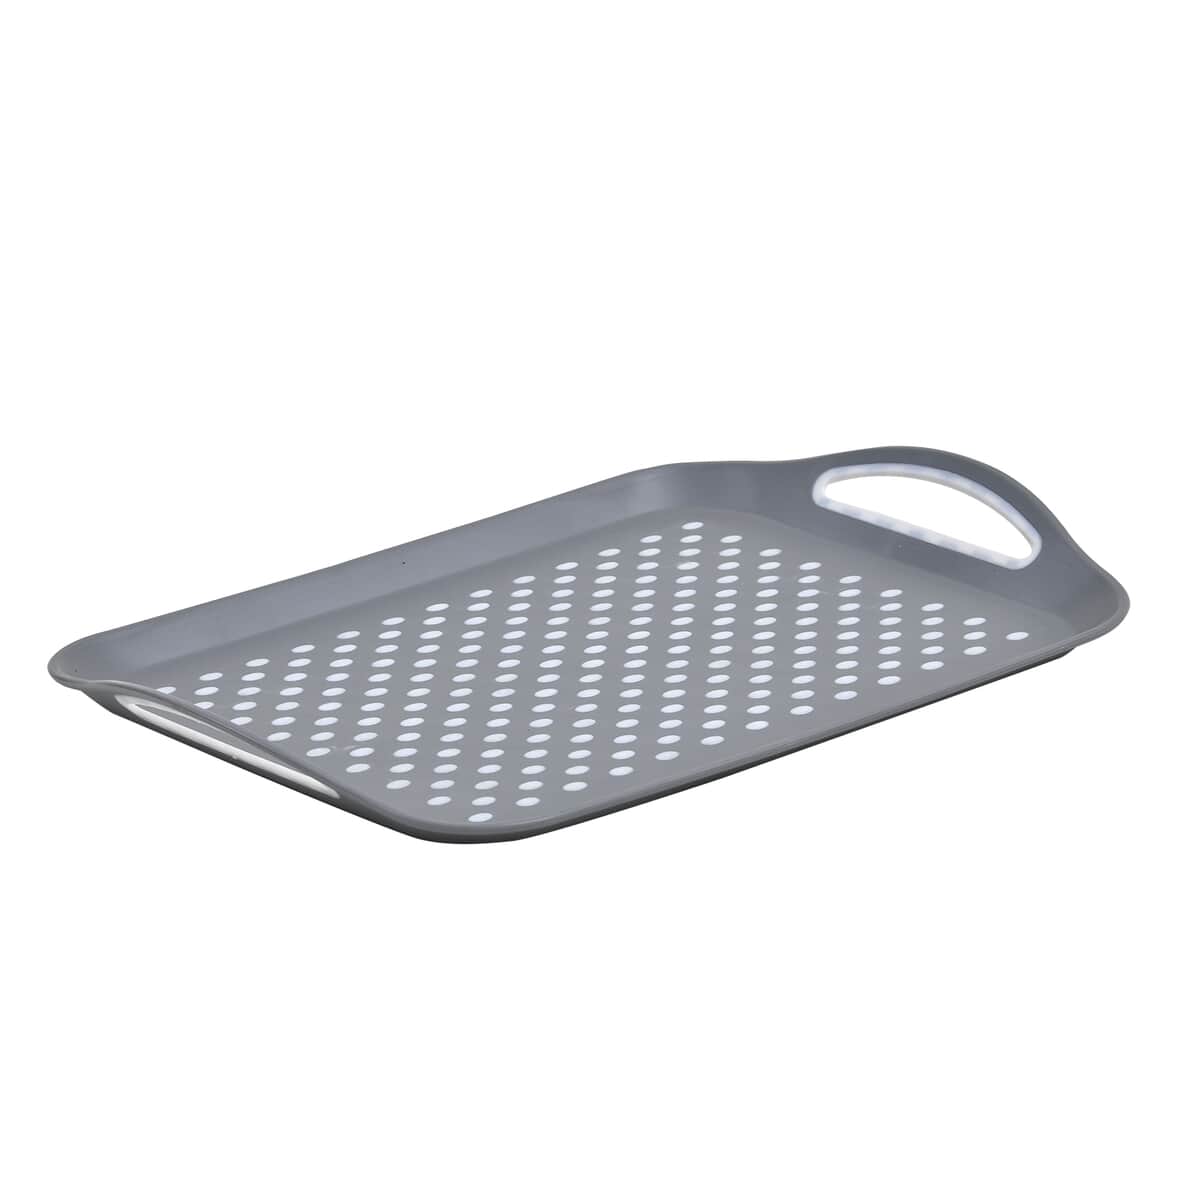 Gray Rectangle Non-Skid Rubber Grip Serving Tray with Handles , Large Serving Tray image number 0